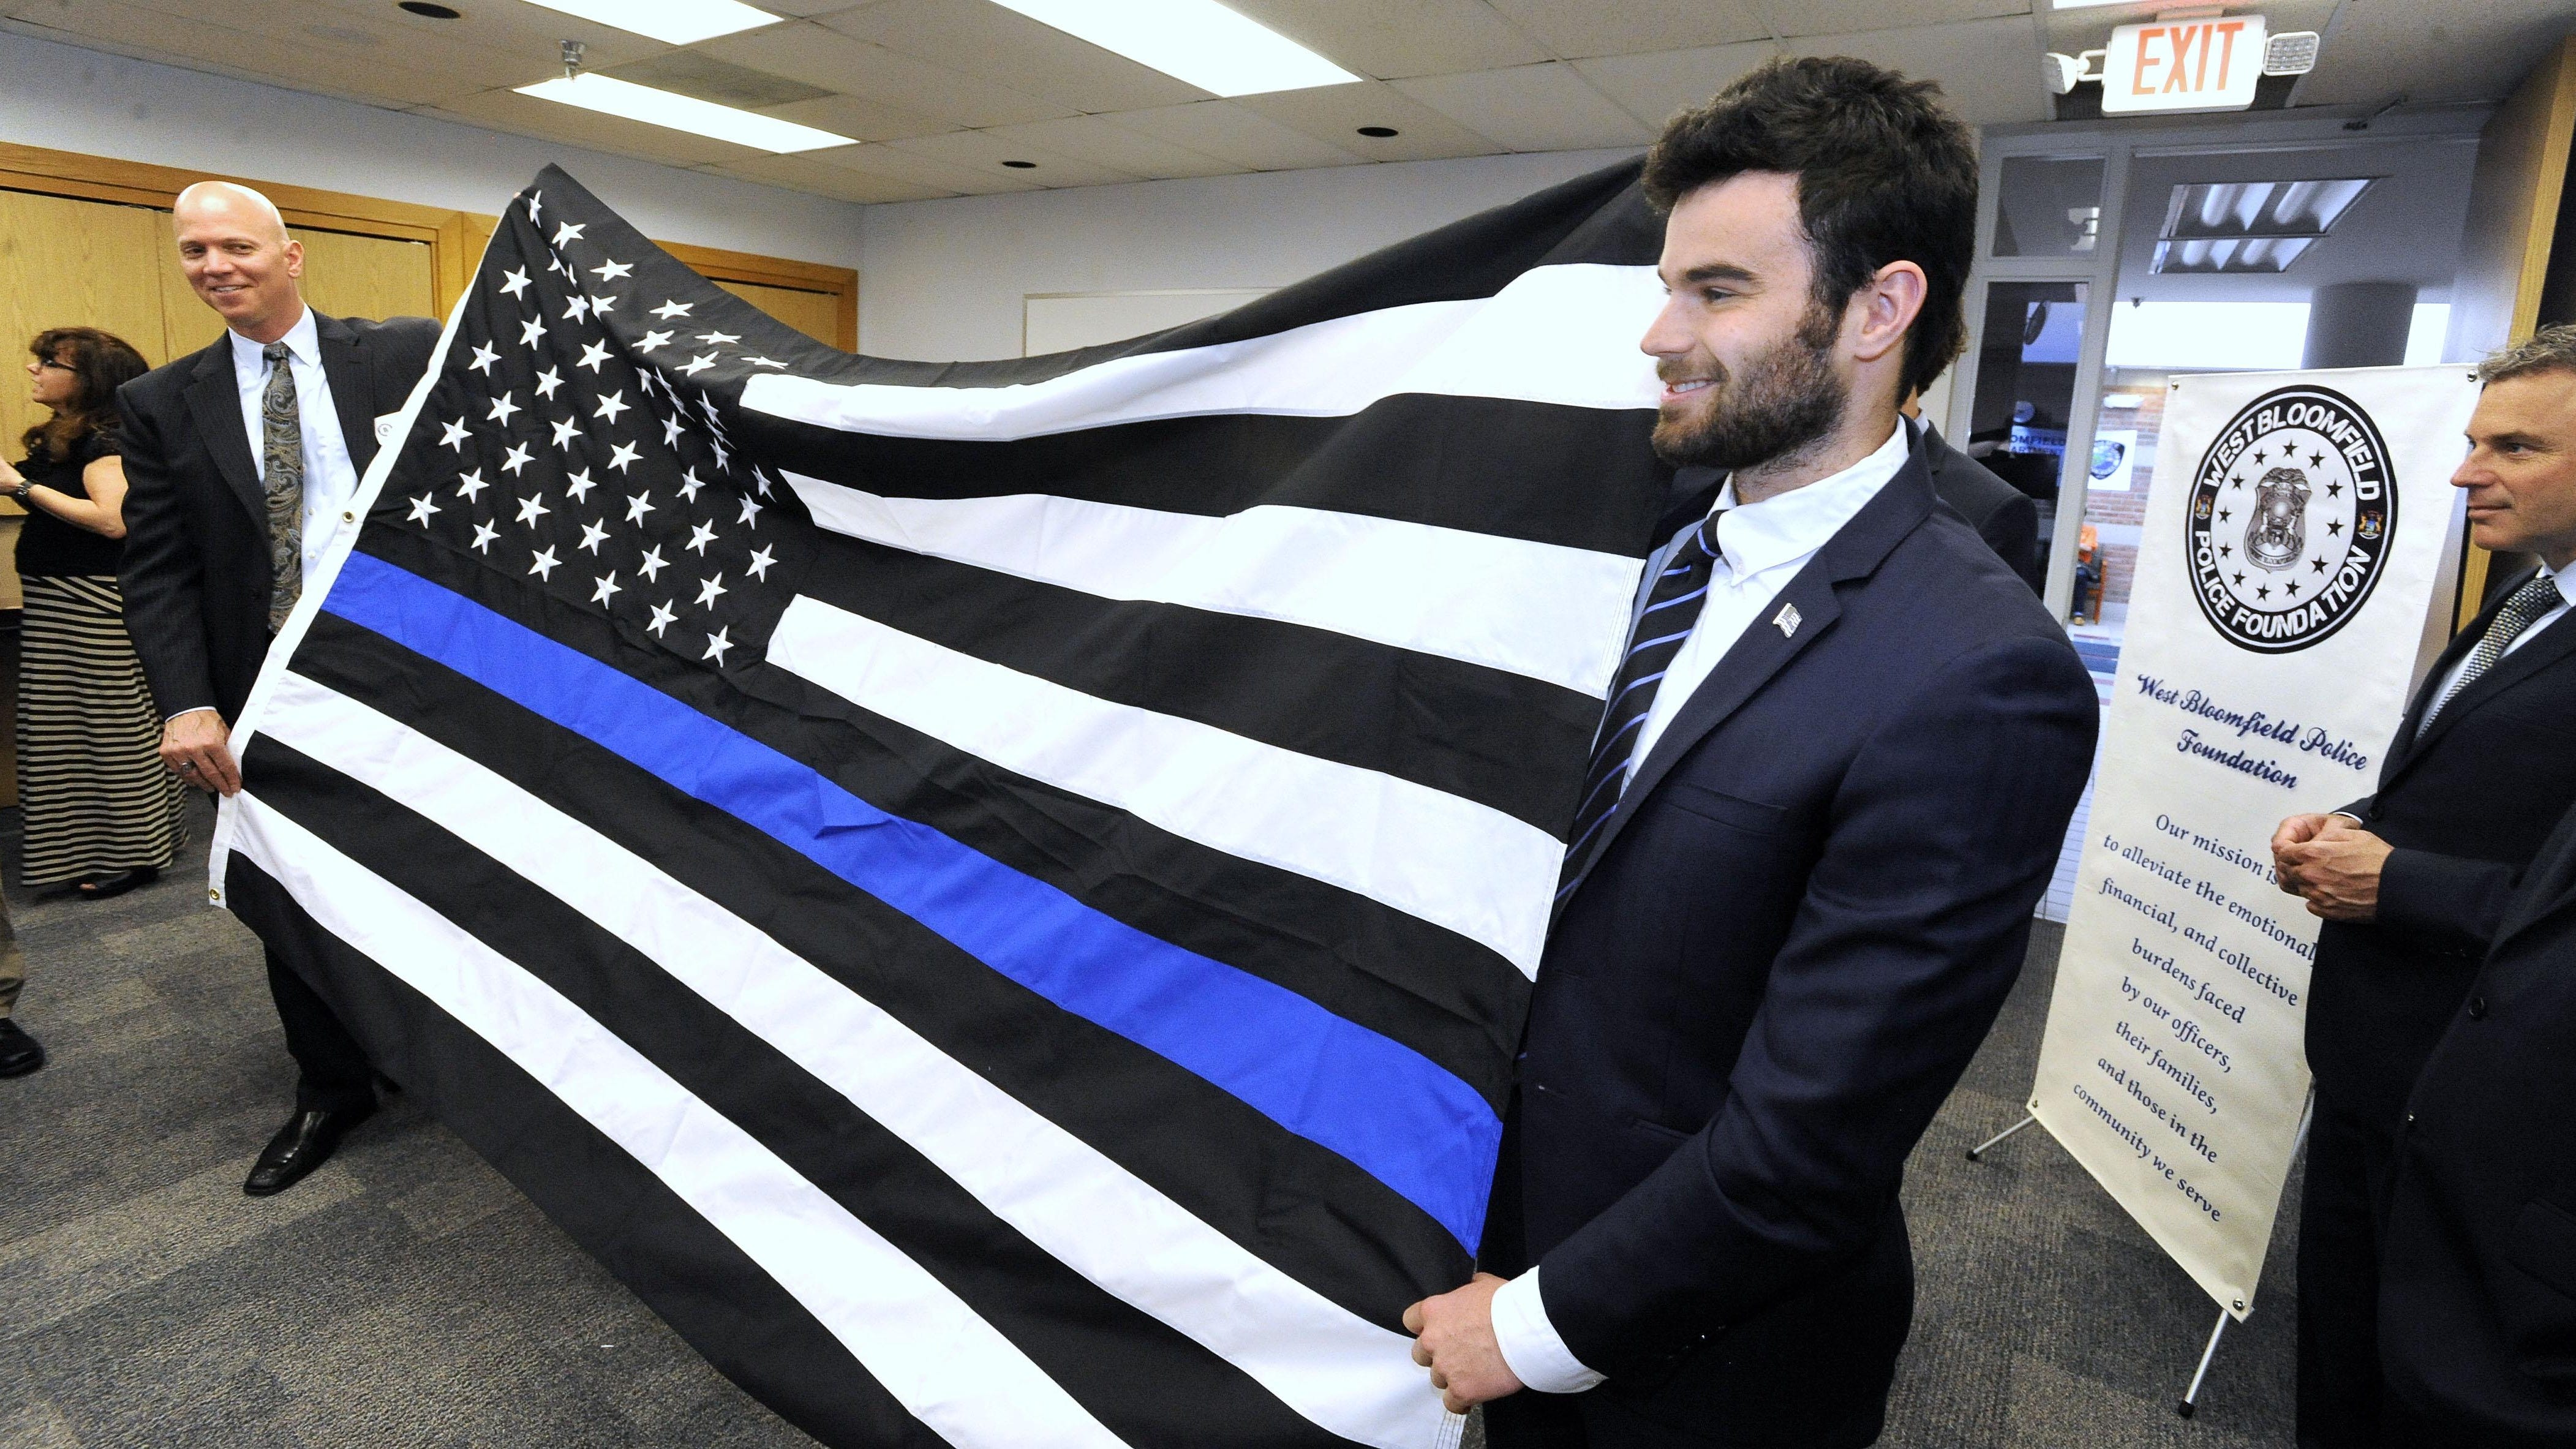 Thin Blue Line president Andrew Jacob, right, presents West Bloomfield Deputy Chief Curt Lawson with a Thin Blue Line flag. The motif could mean a number of things, including a representation of fallen officers.